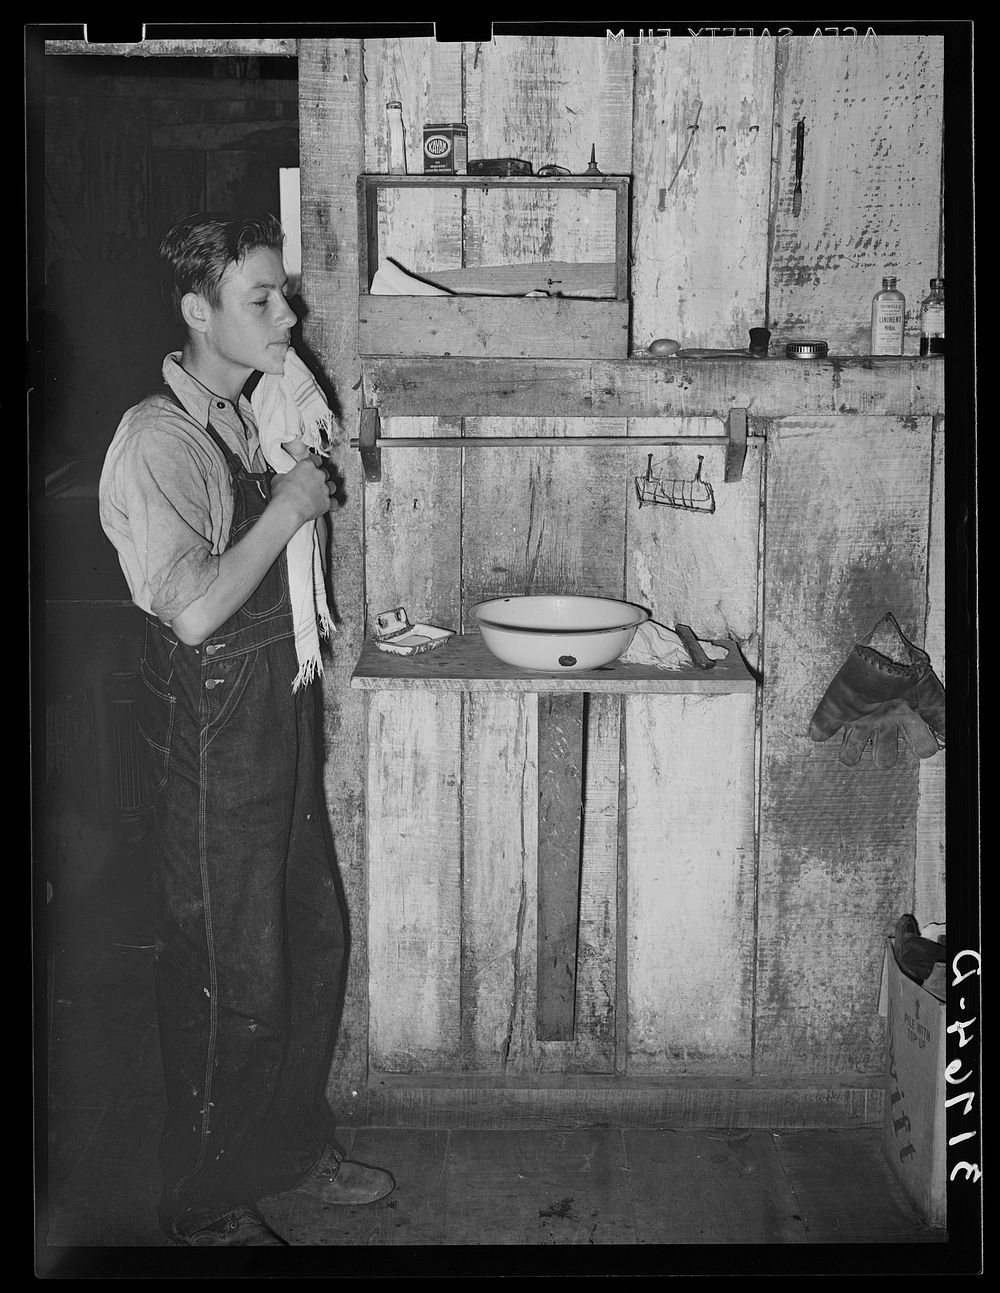 Son of M. LaBlanc washing his face in farm home. Morganza, Louisiana. M. LaBlanc is a tenant purchase client by Russell Lee